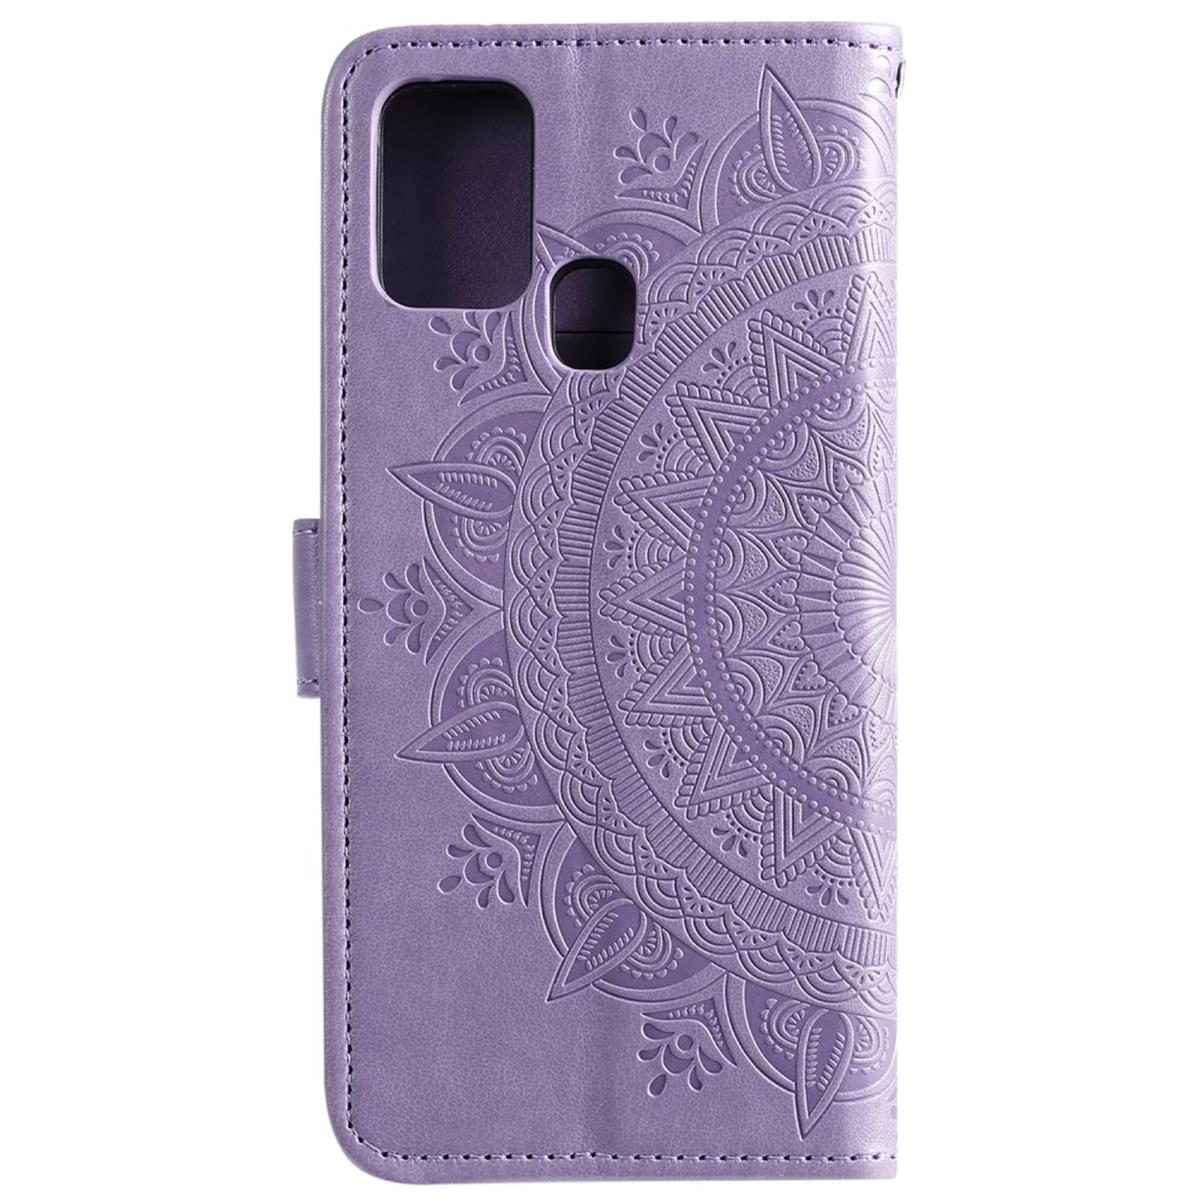 COVERKINGZ Klapphülle mit Muster, Bookcover, Huawei, Mandala Y6p, Lila